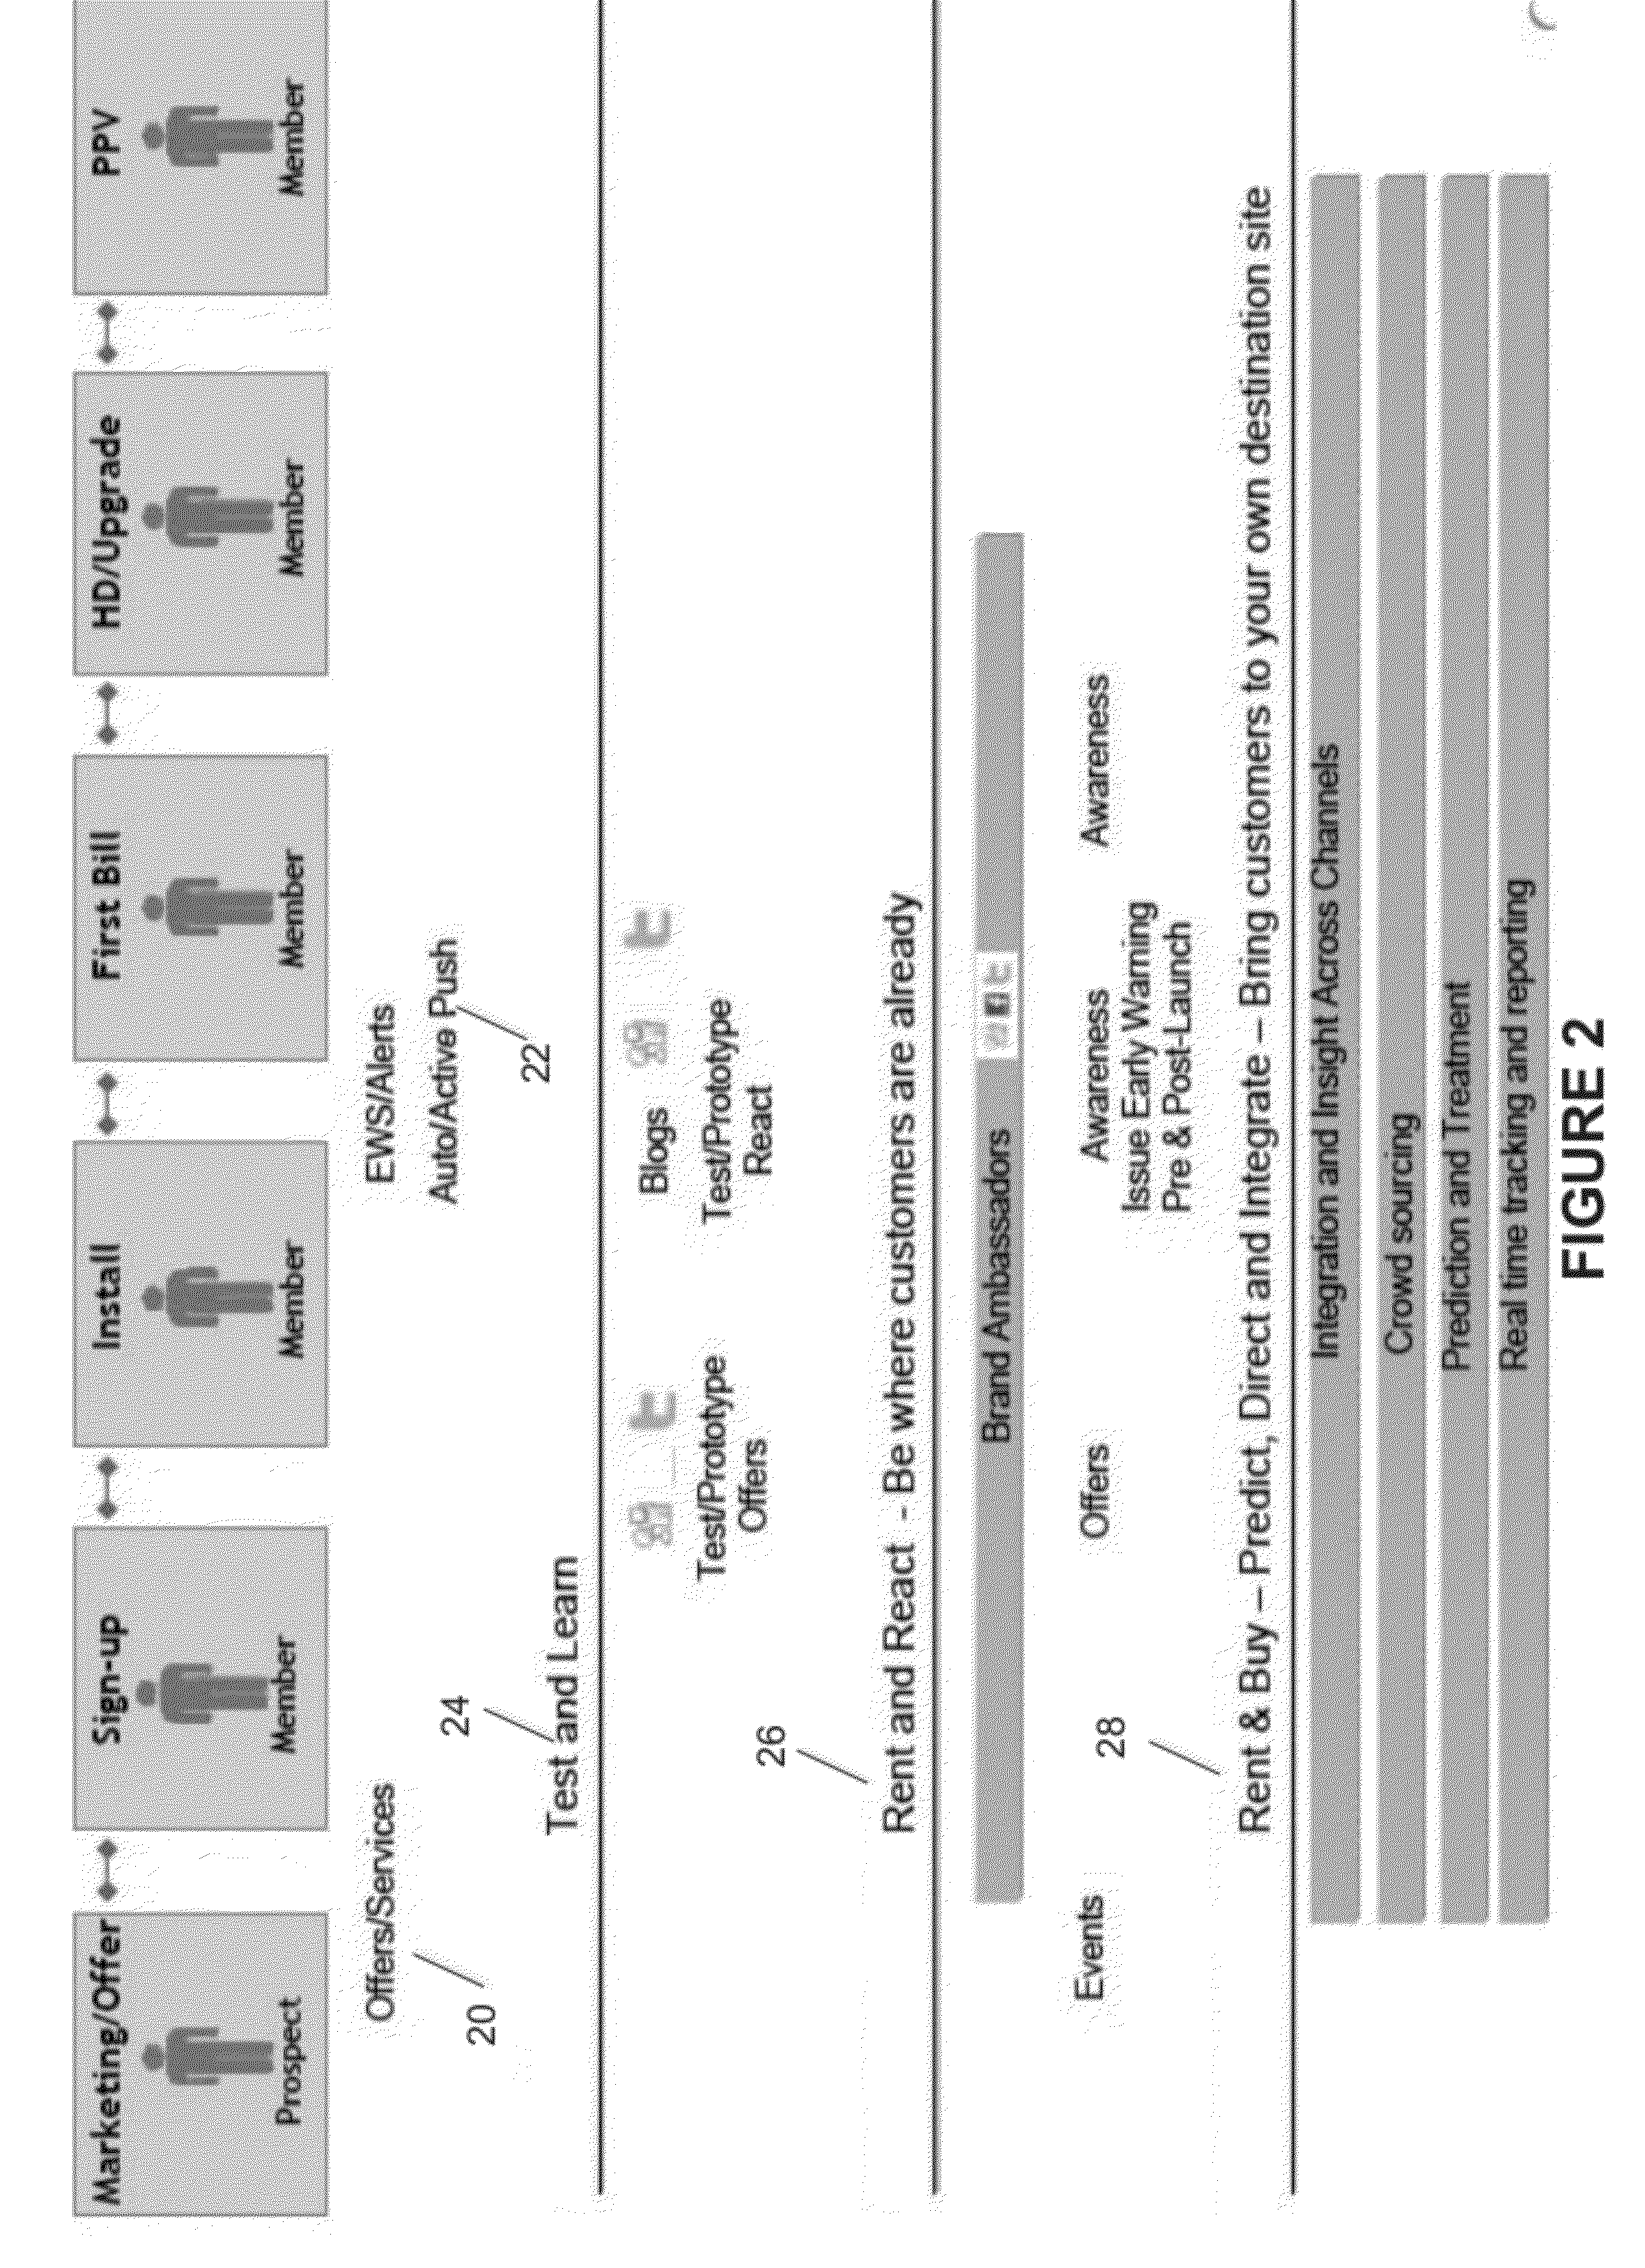 Method and apparatus for analyzing and applying data related to customer interactions with social media